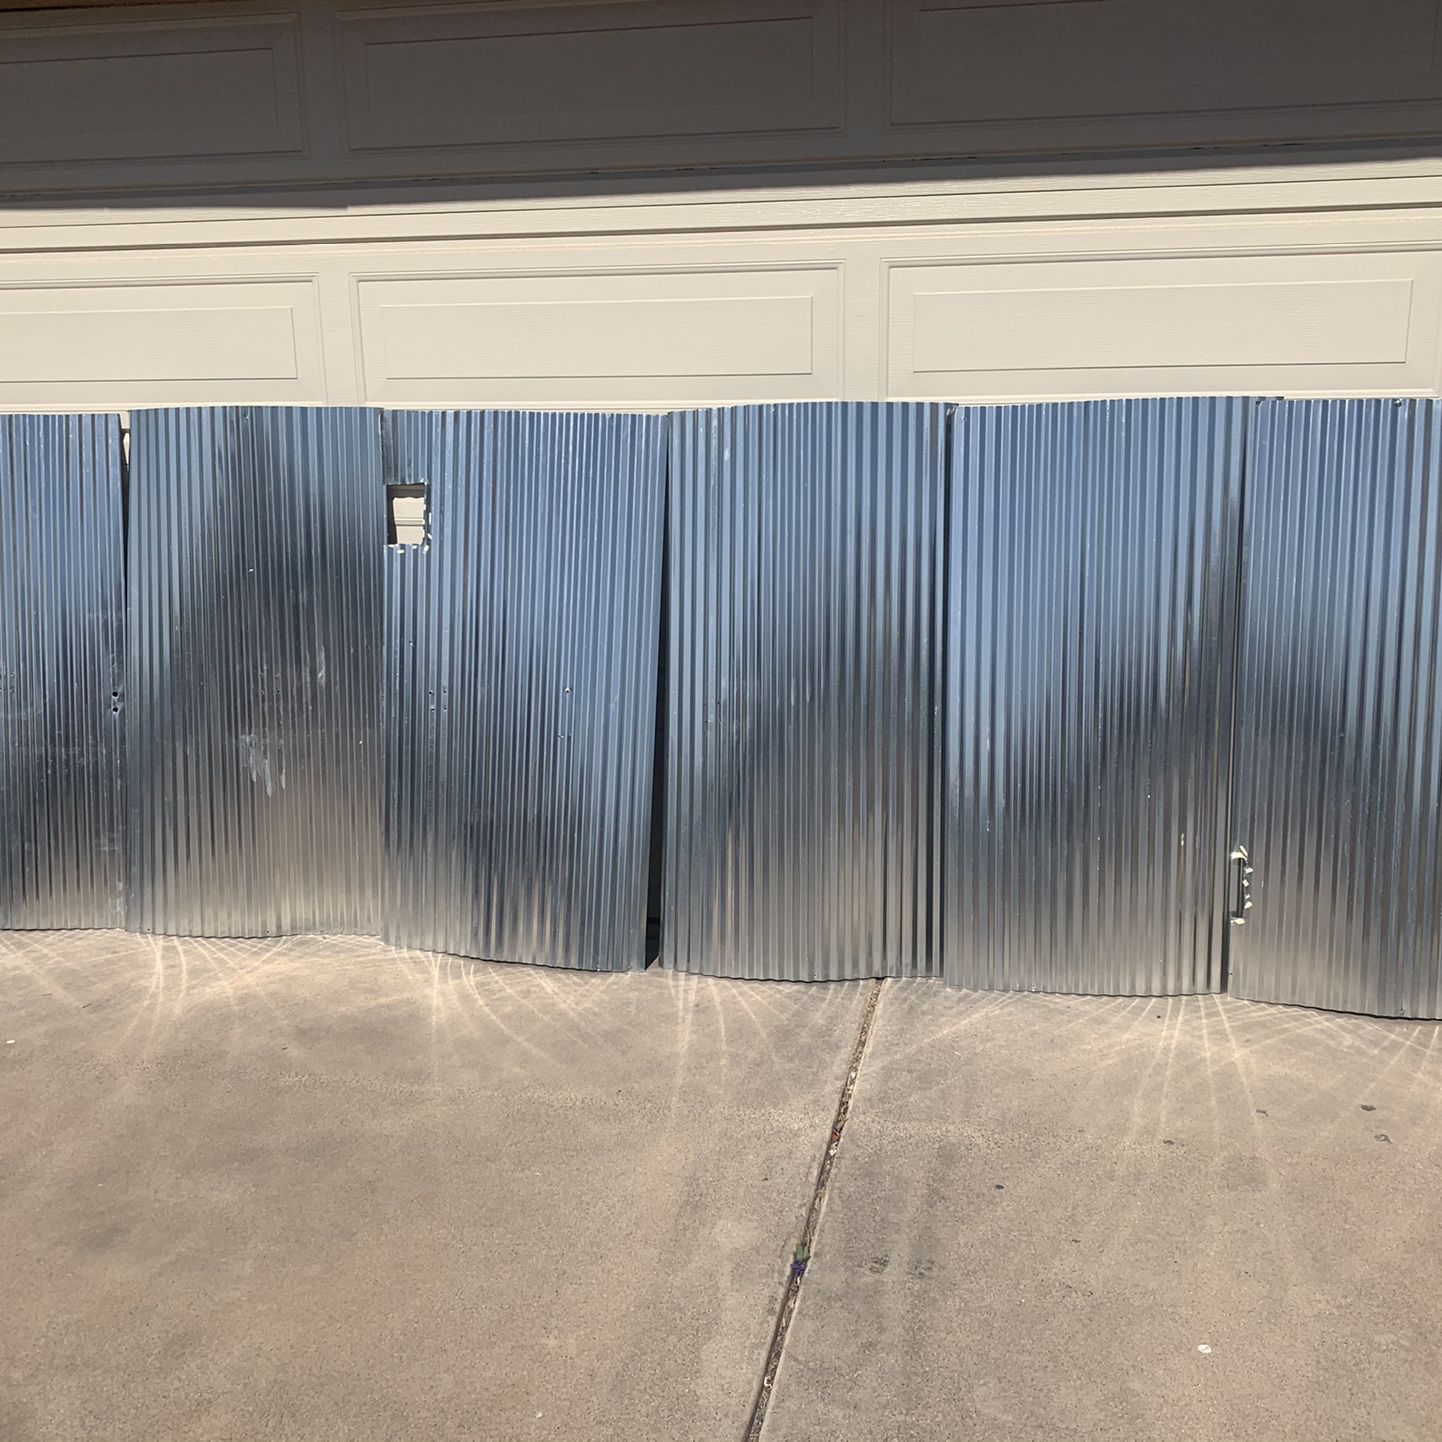 new corrugated metal sheets for Sale in Scottsdale, AZ - OfferUp